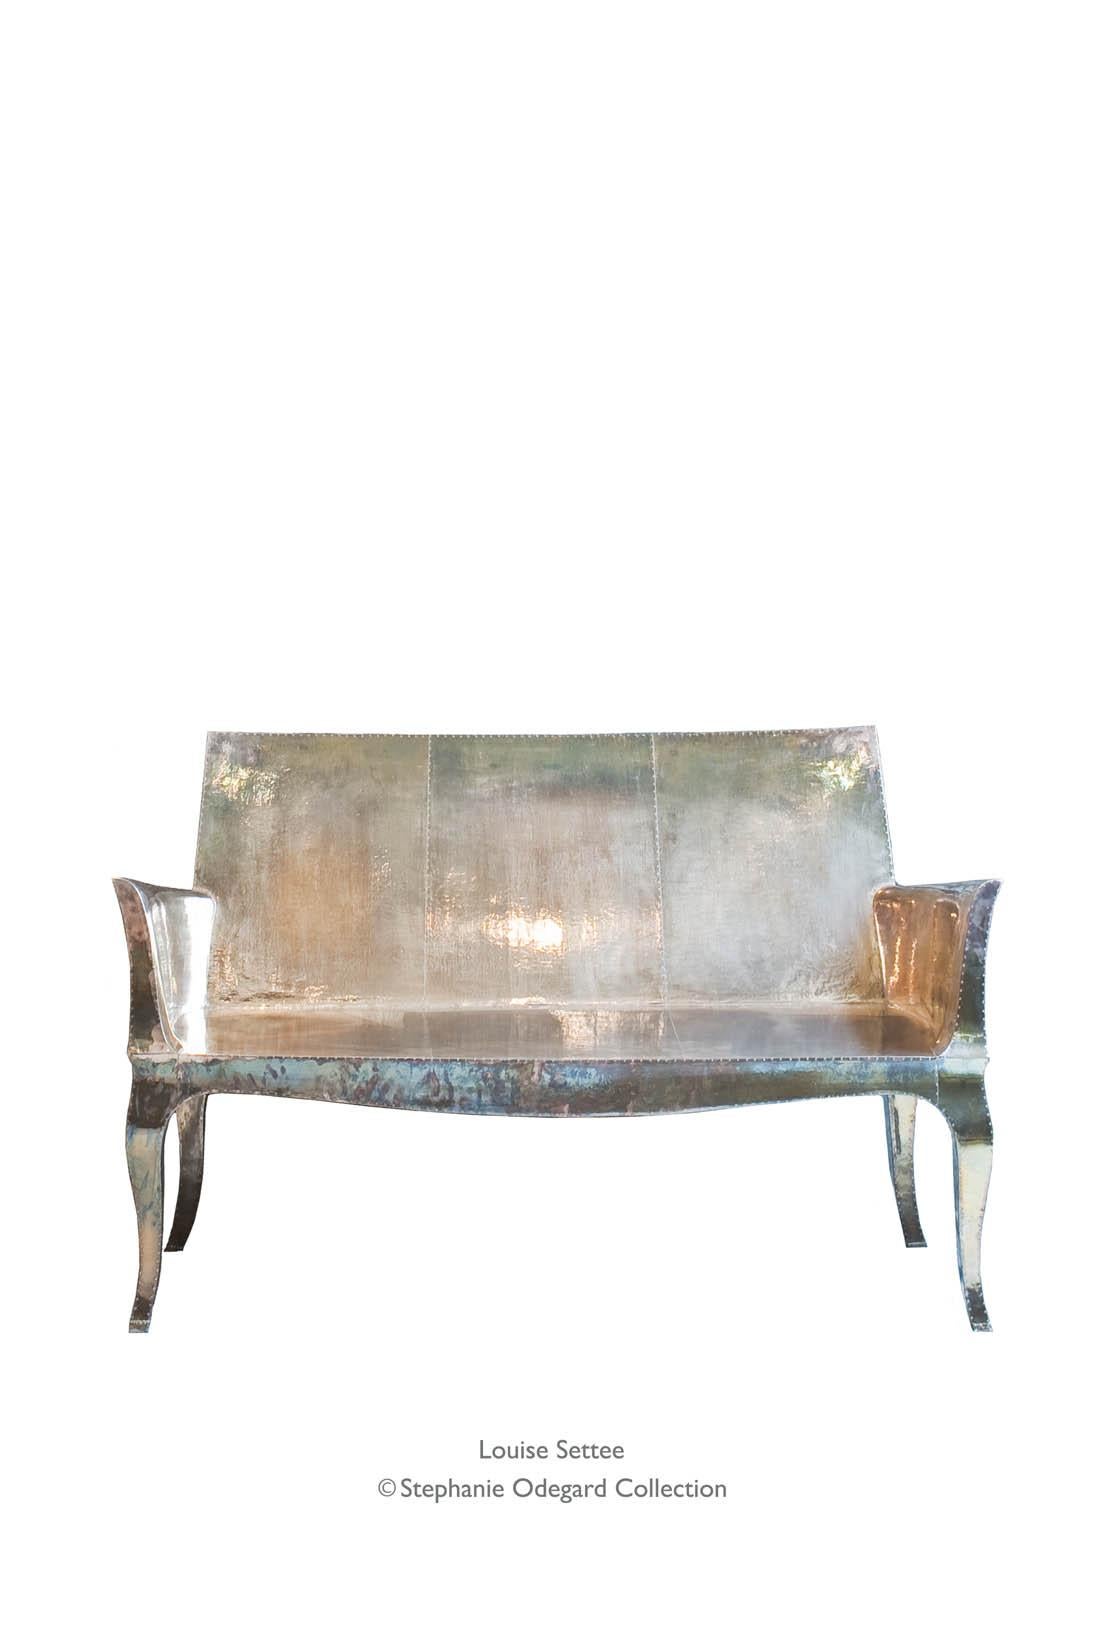 Louise Settee Art Deco Loveseats in Mid. Hammered Copper by Paul Mathieu For Sale 6